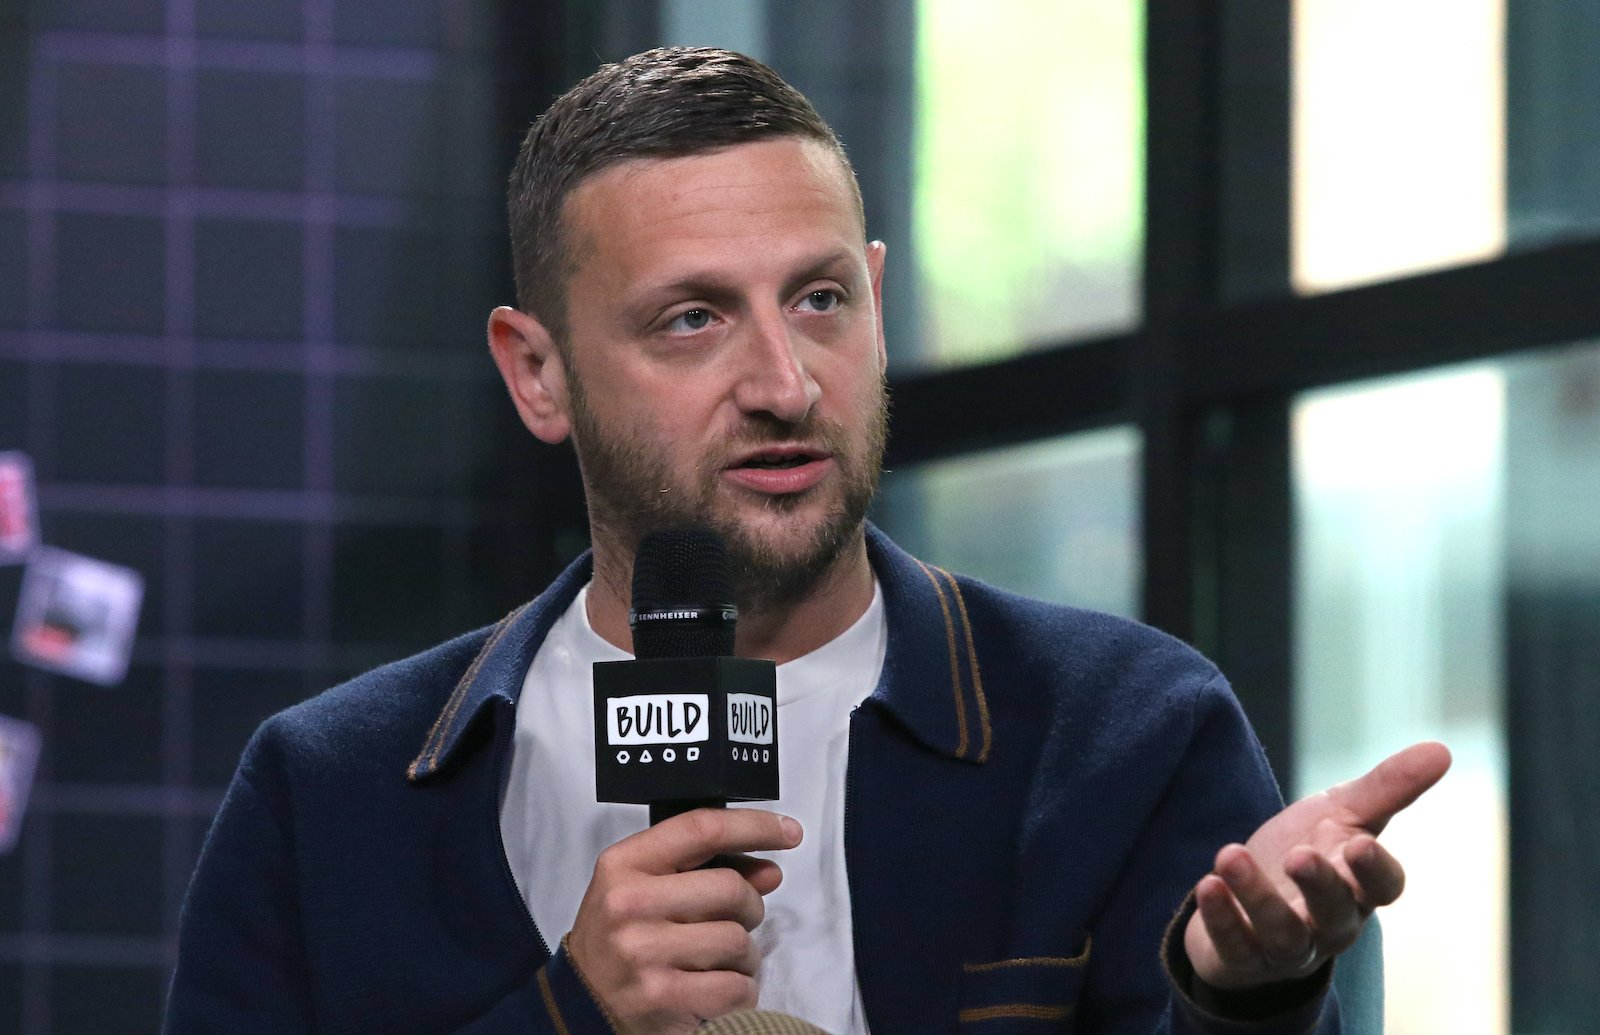 Tim Robinson from I Think You Should Leave has skateboarding skills that have left fans shocked